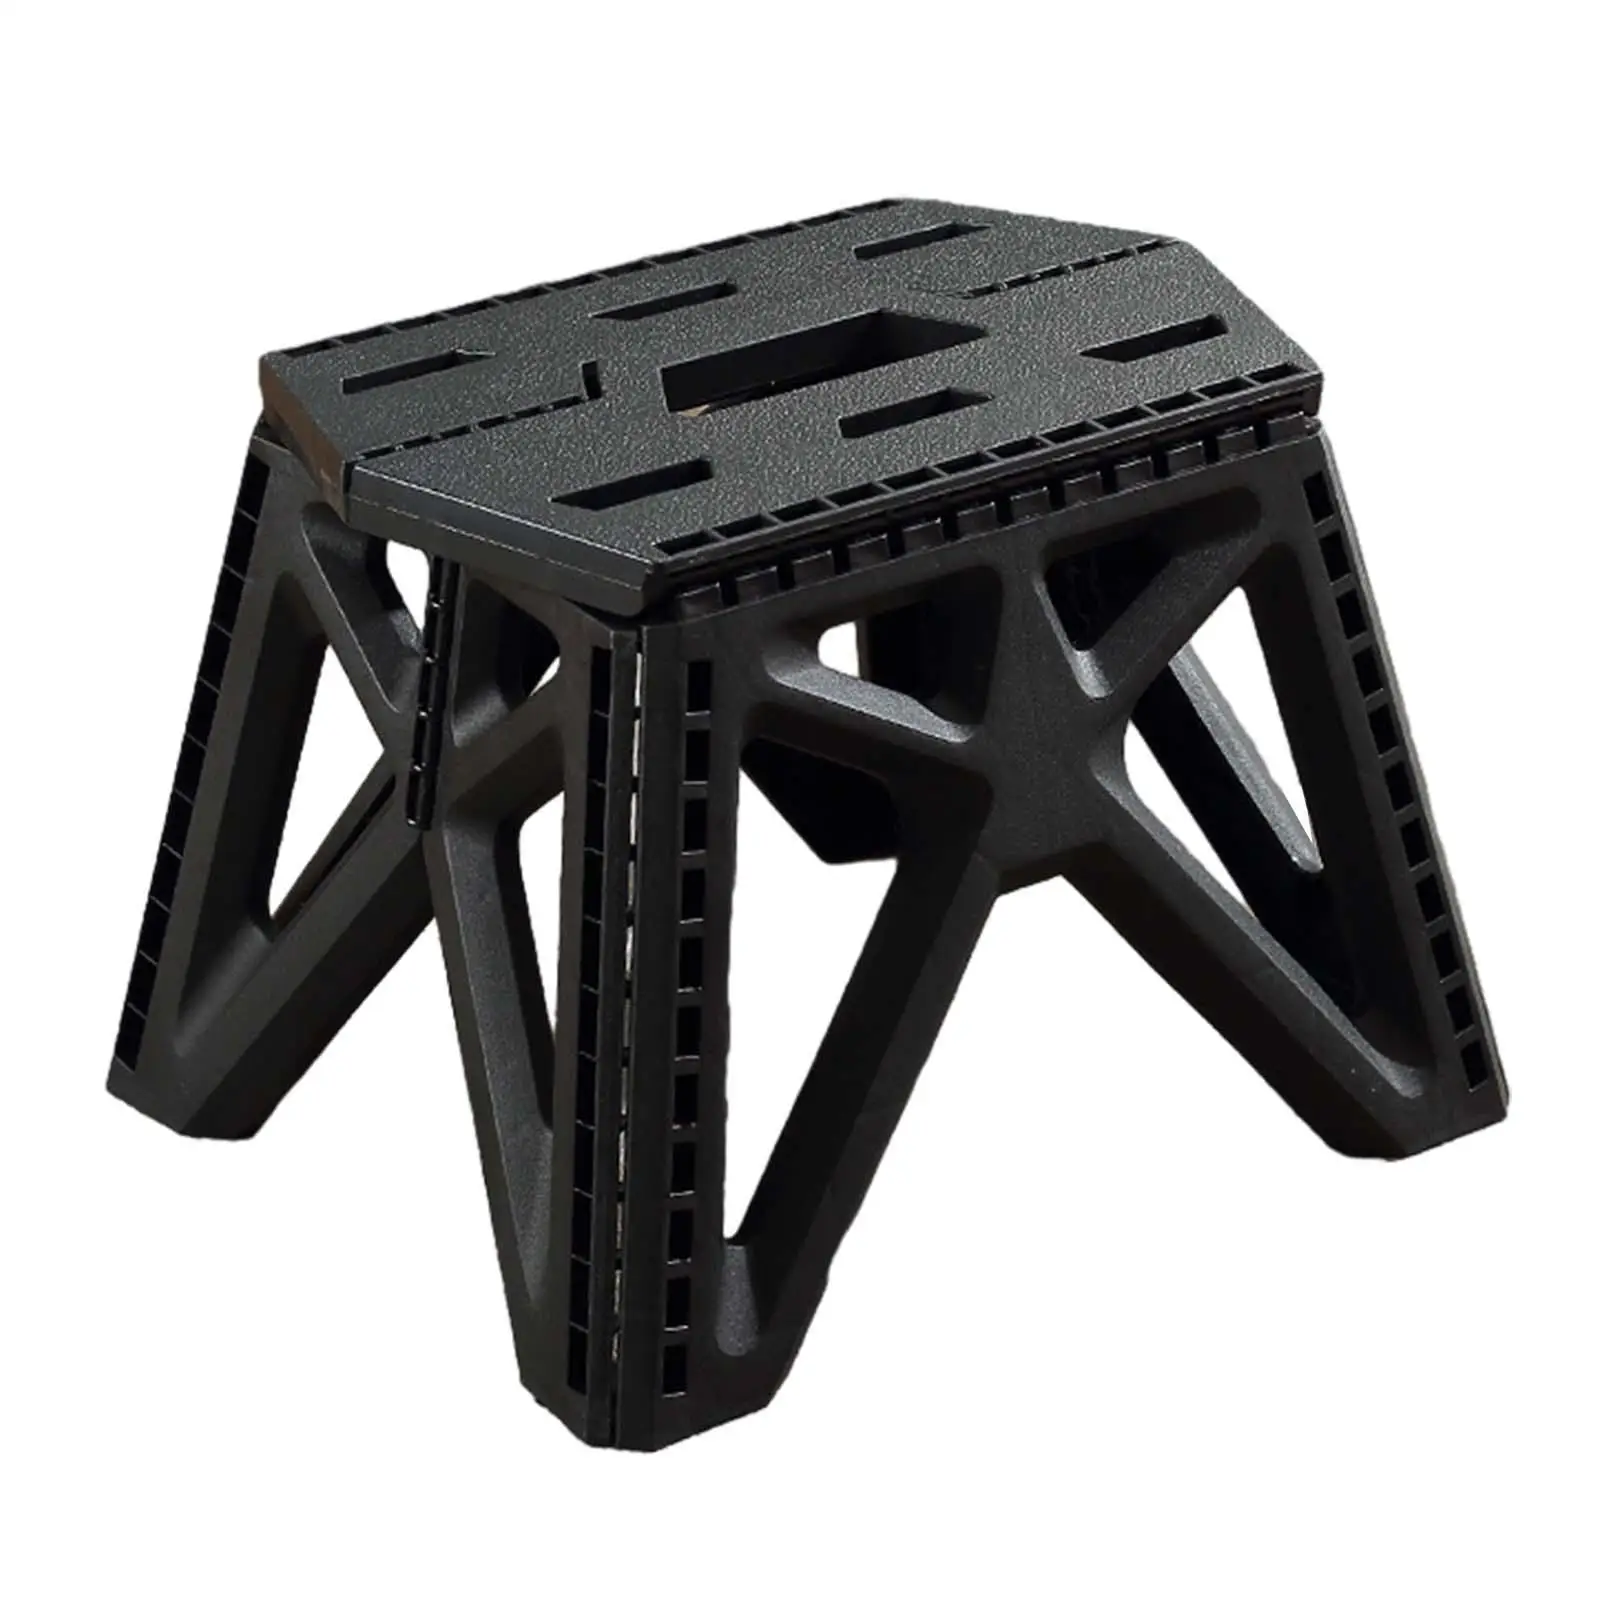 Foldable Camping Stool Collapsible Stool Lightweight Furniture Outside Foldable Stool Chair for Picnic BBQ Backyard Patio Yard